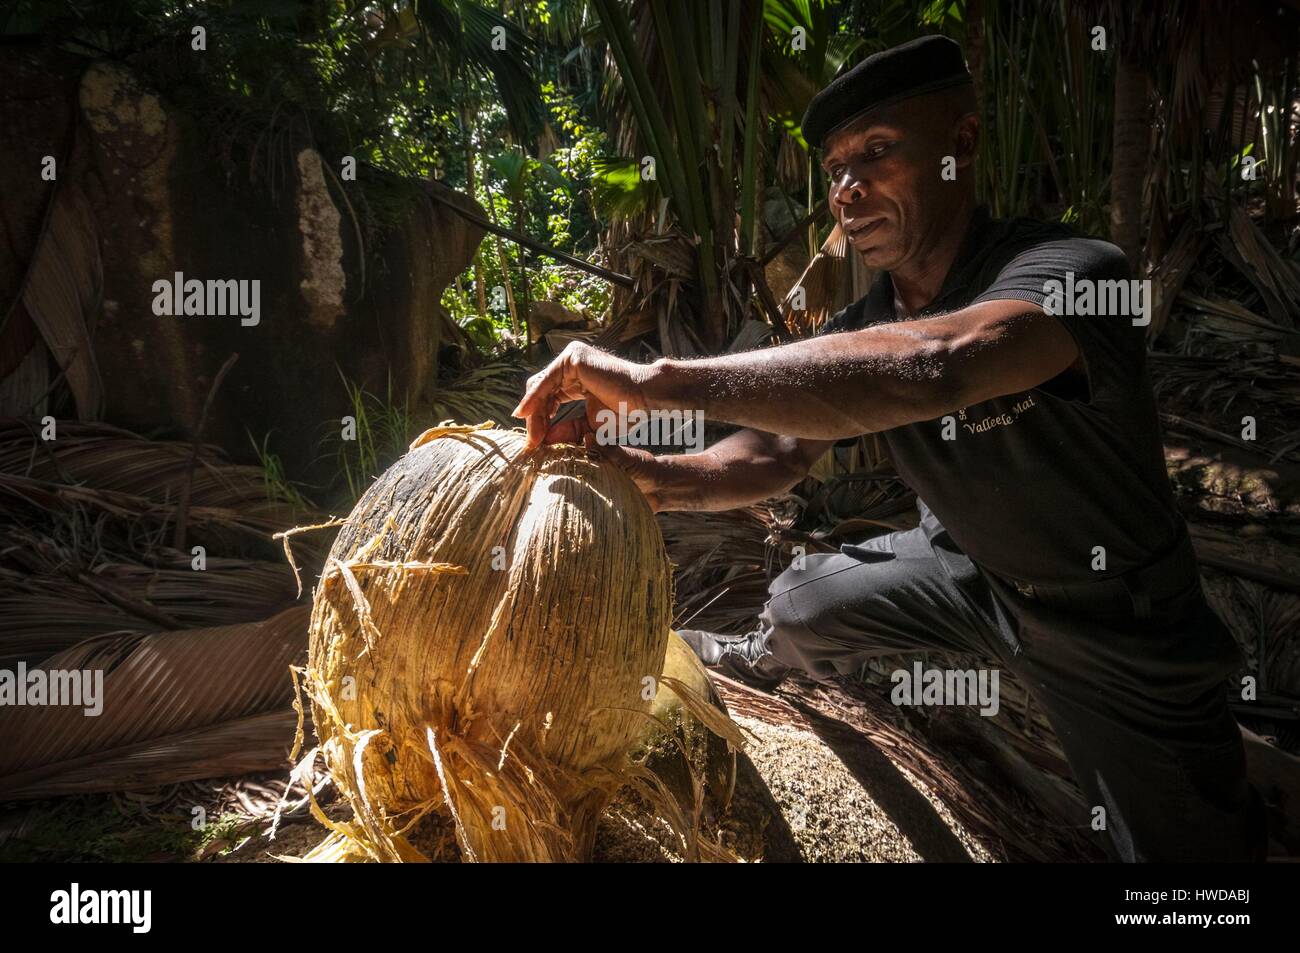 Seychelles,Praslin Island,Vallée de Mai National Park,Unesco World Heritage,the ranger Andrea RADEGONDE patrols every day,several times a day,in thelooking for endemic coco de mer (Lodoicea maldivica) fallen on the ground,he hides them under a giant coco de mer dry palm until the field workers bring them back to the office of the Seychelles Islands Foundation (SIF) during their collects,every monday morning,Andrea is there to fight against poaching and coco de mer theft (prized for their flesh which 1kg dry can be sold for US$ 30 on the Asian market Stock Photo